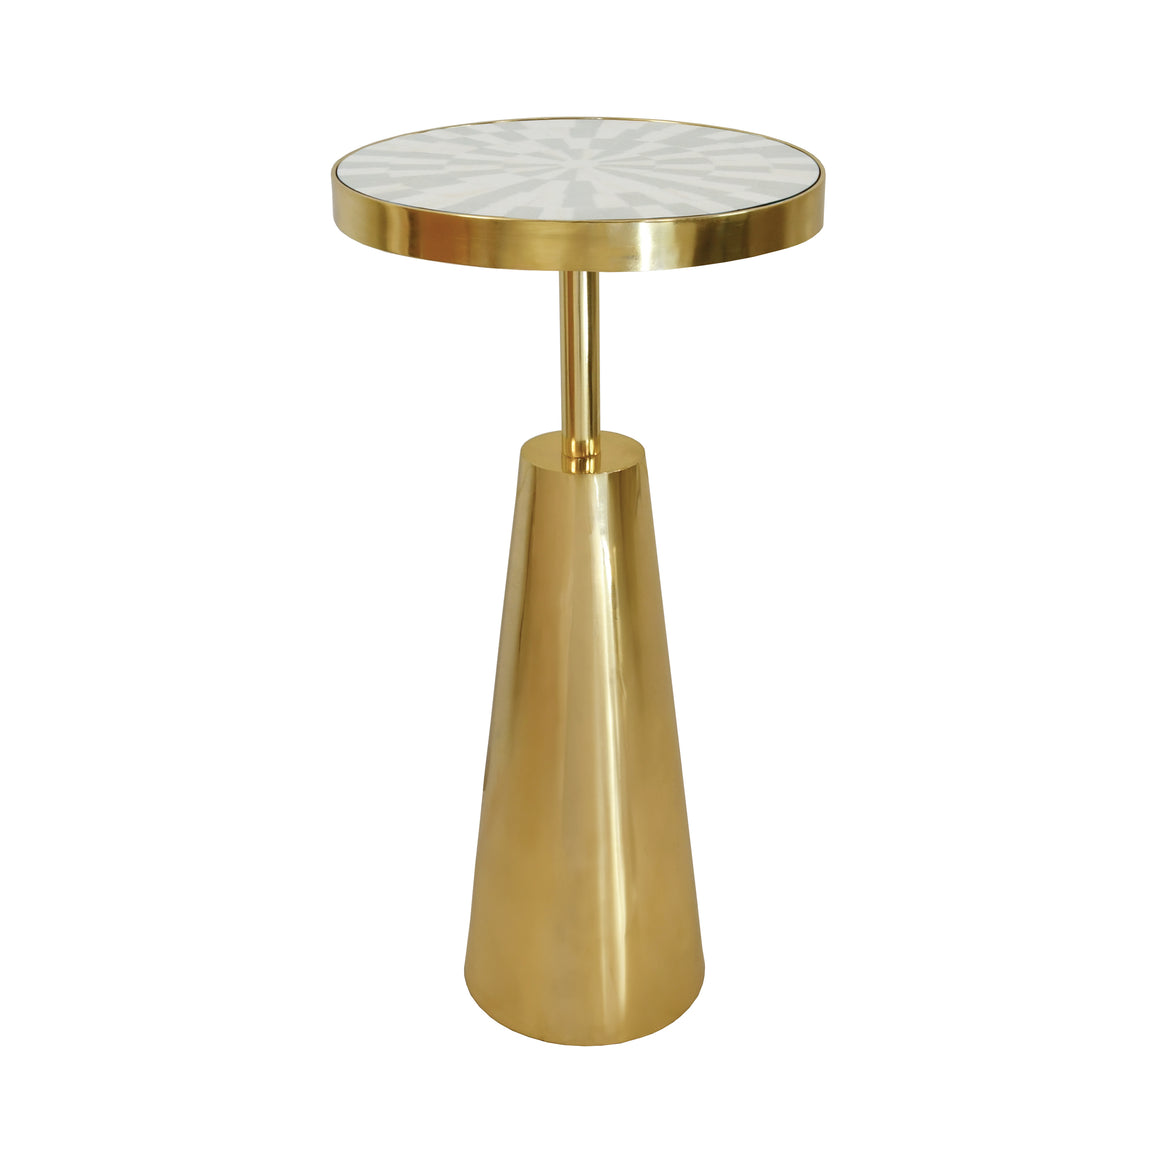 Tapered Brass Side Table with Round Inlaid Radial Natural Bone and Resin Top